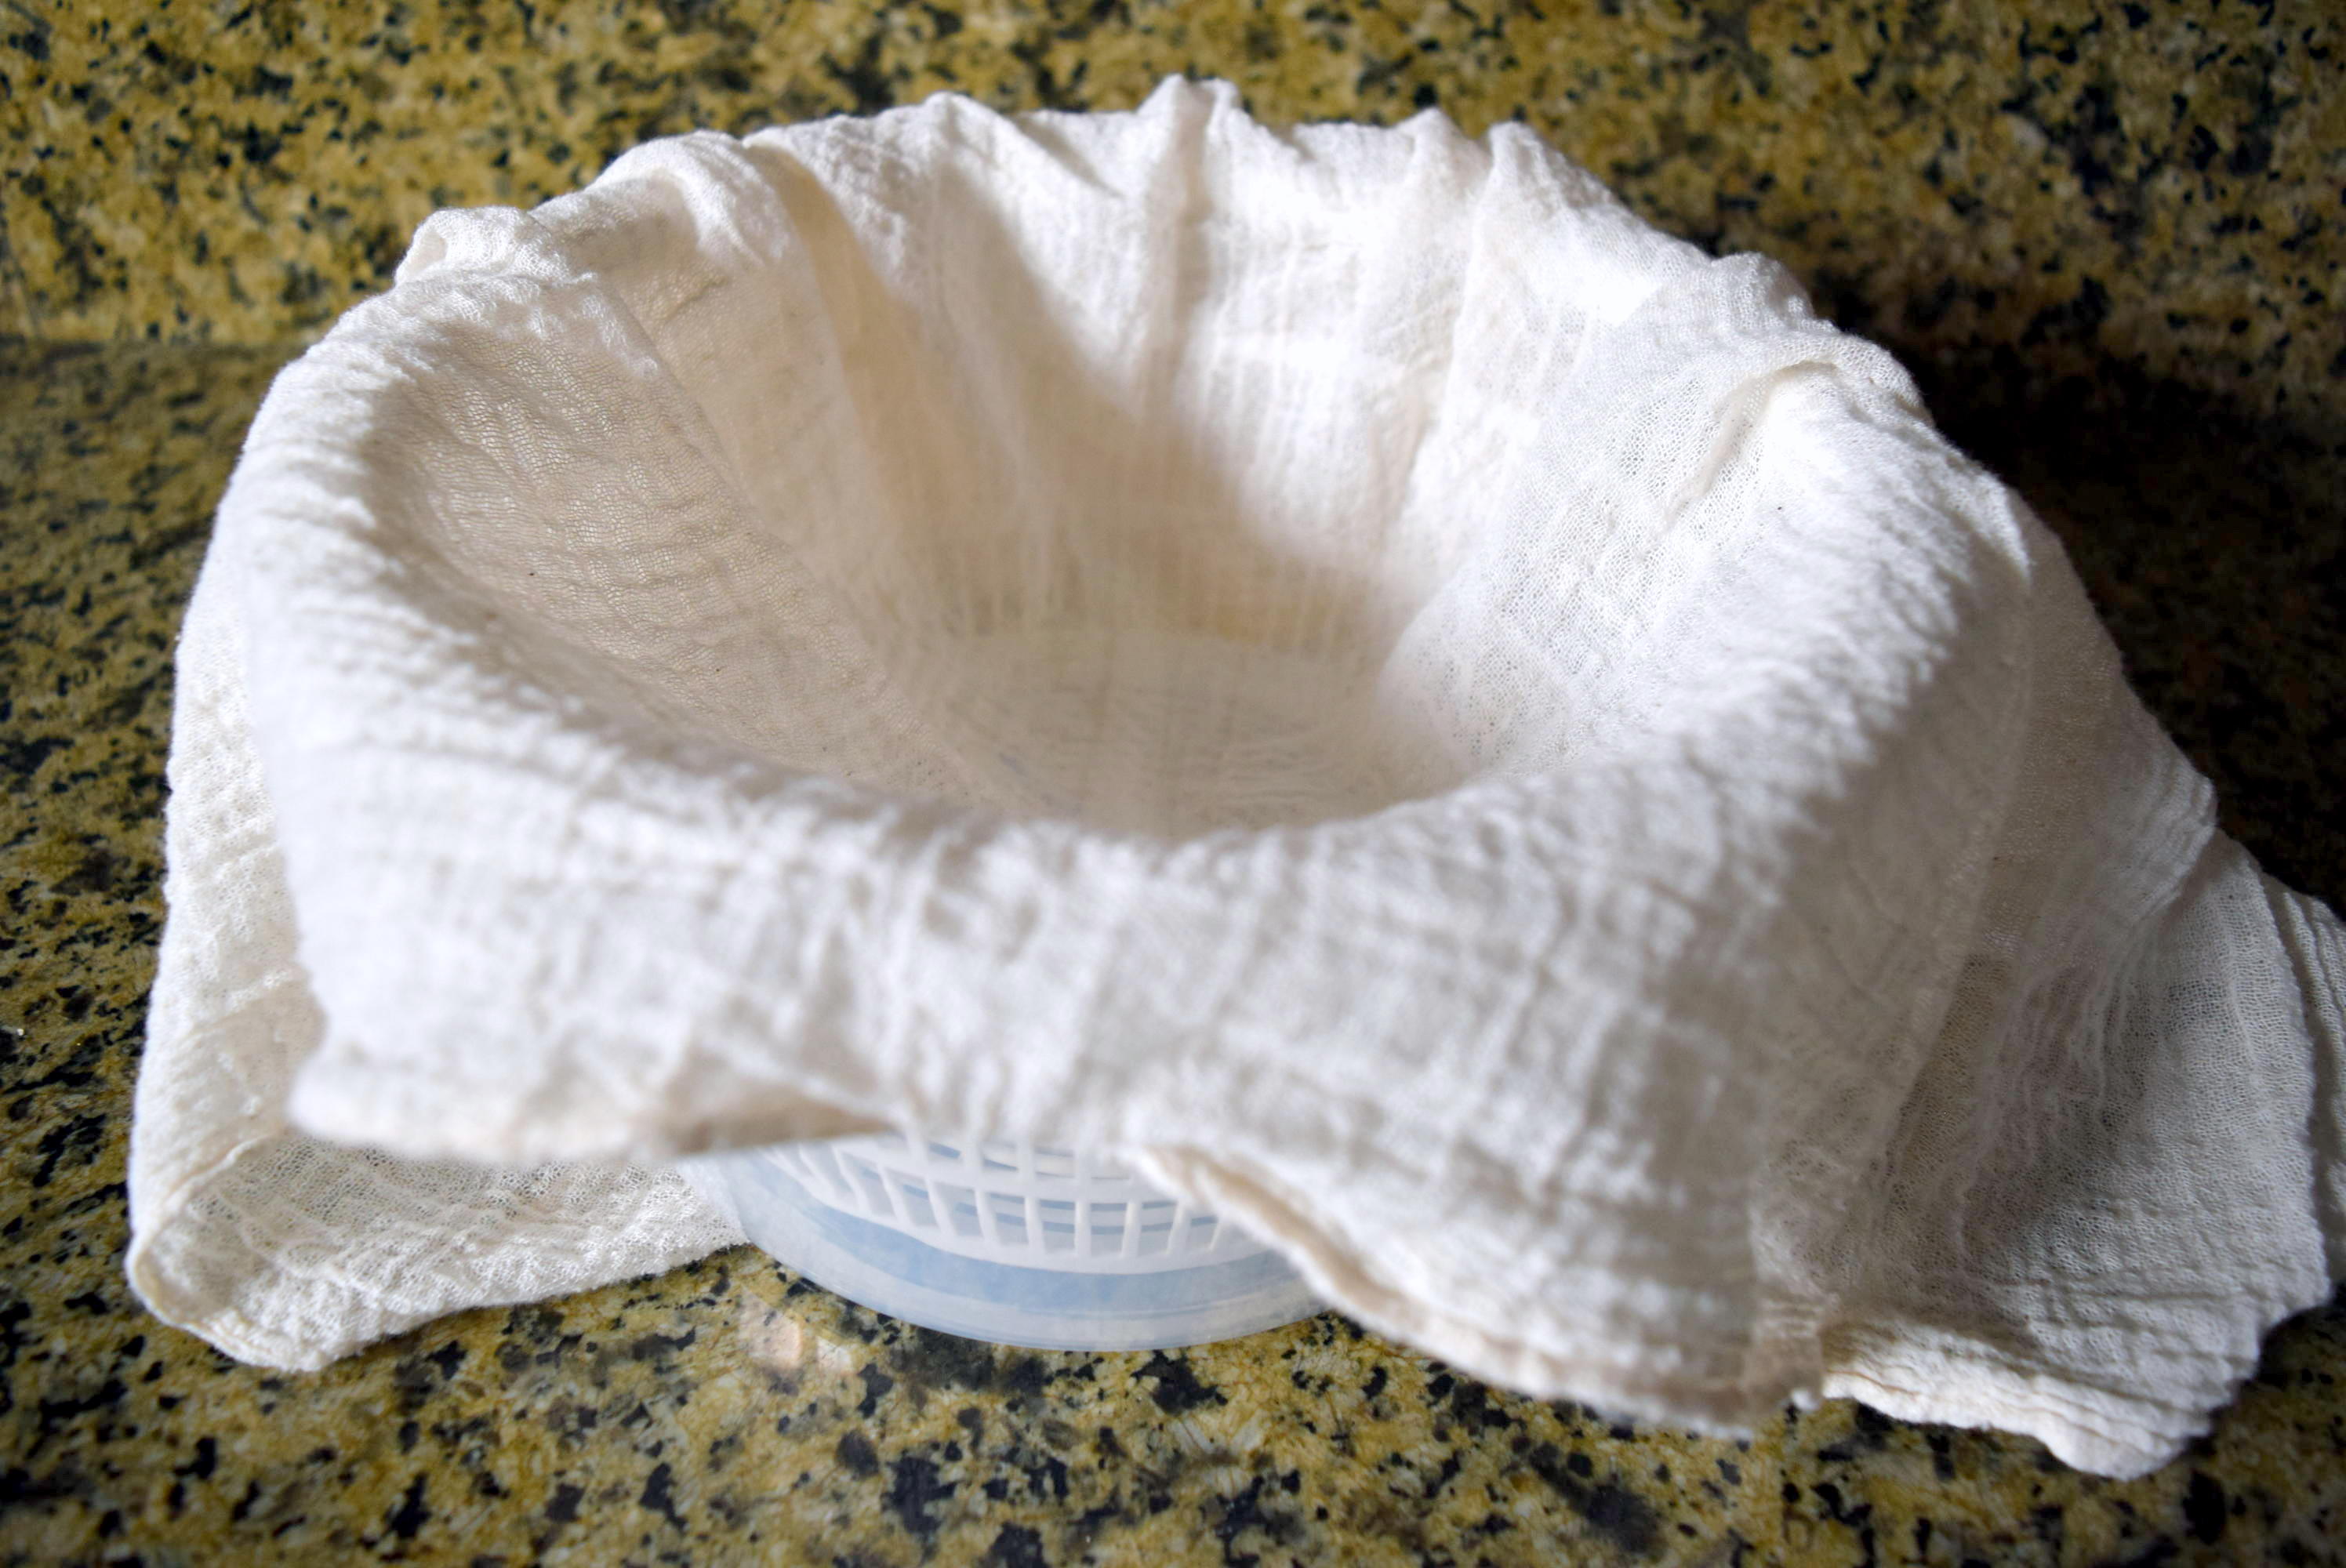 Cheesecloth and IKEA Tokig salad spinner for Homemade Instant Pot Ricotta Cheese from top angle